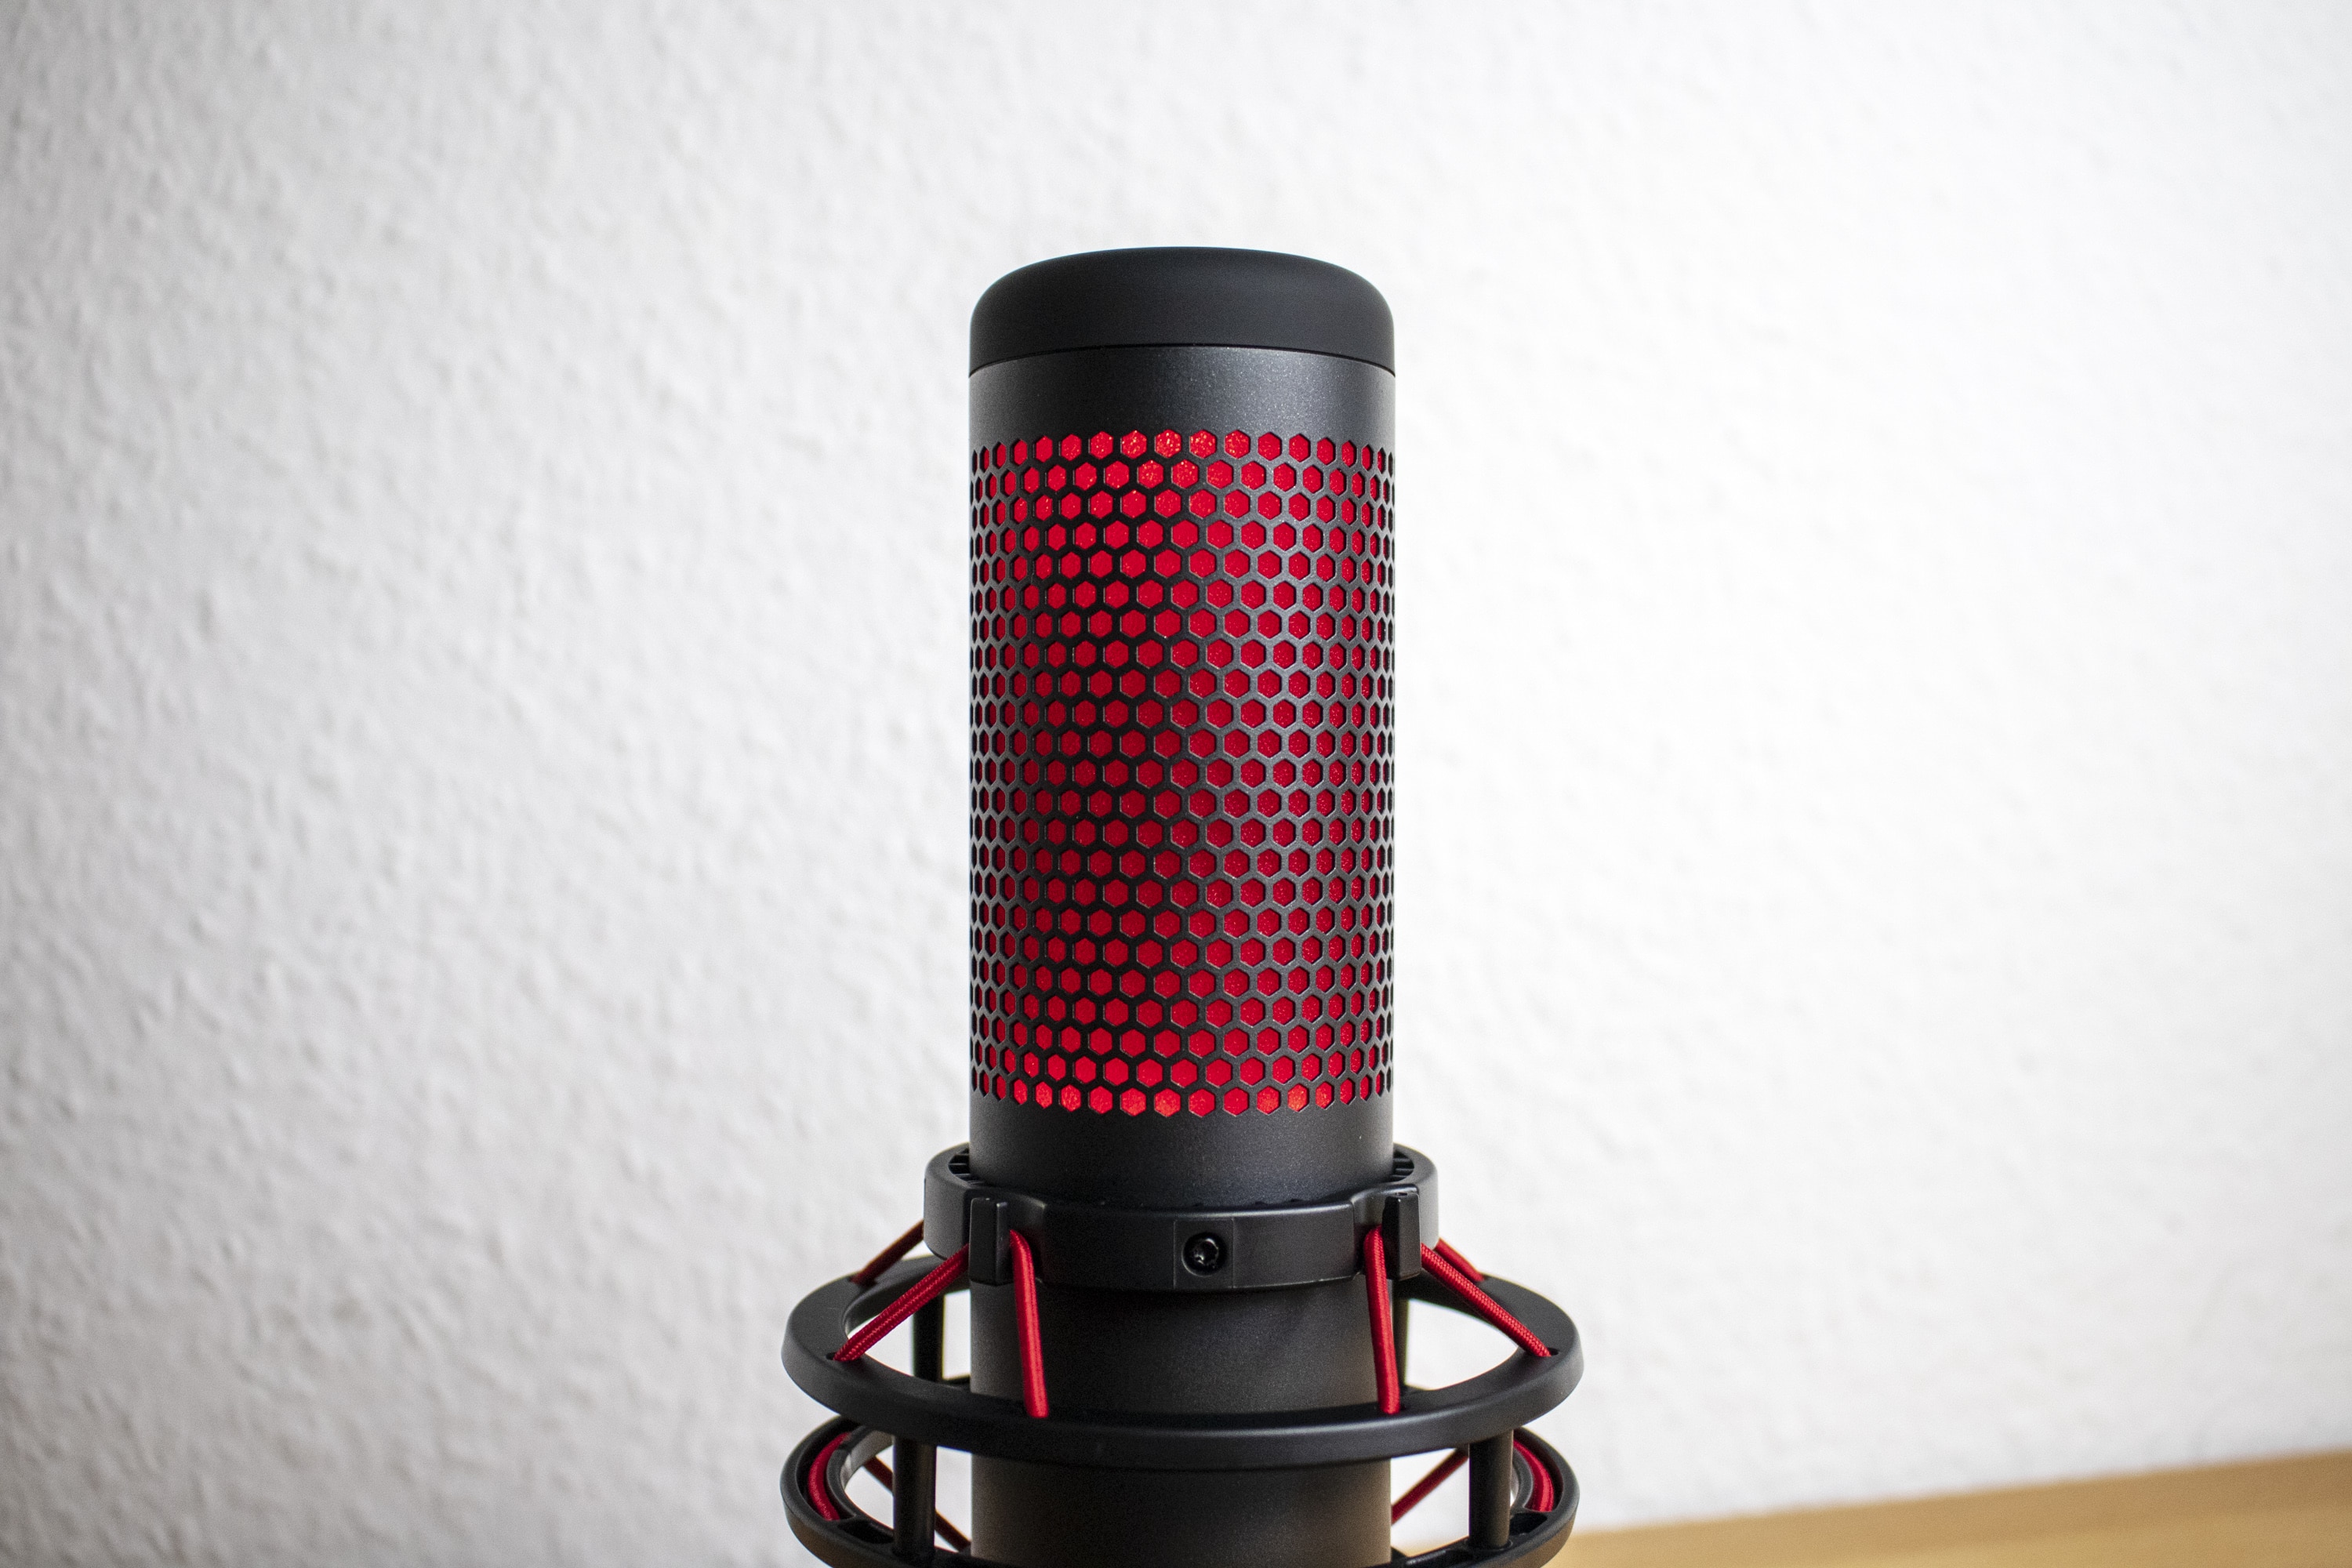 HyperX QuadCast USB Microphone Review: A New Contender - PC Perspective